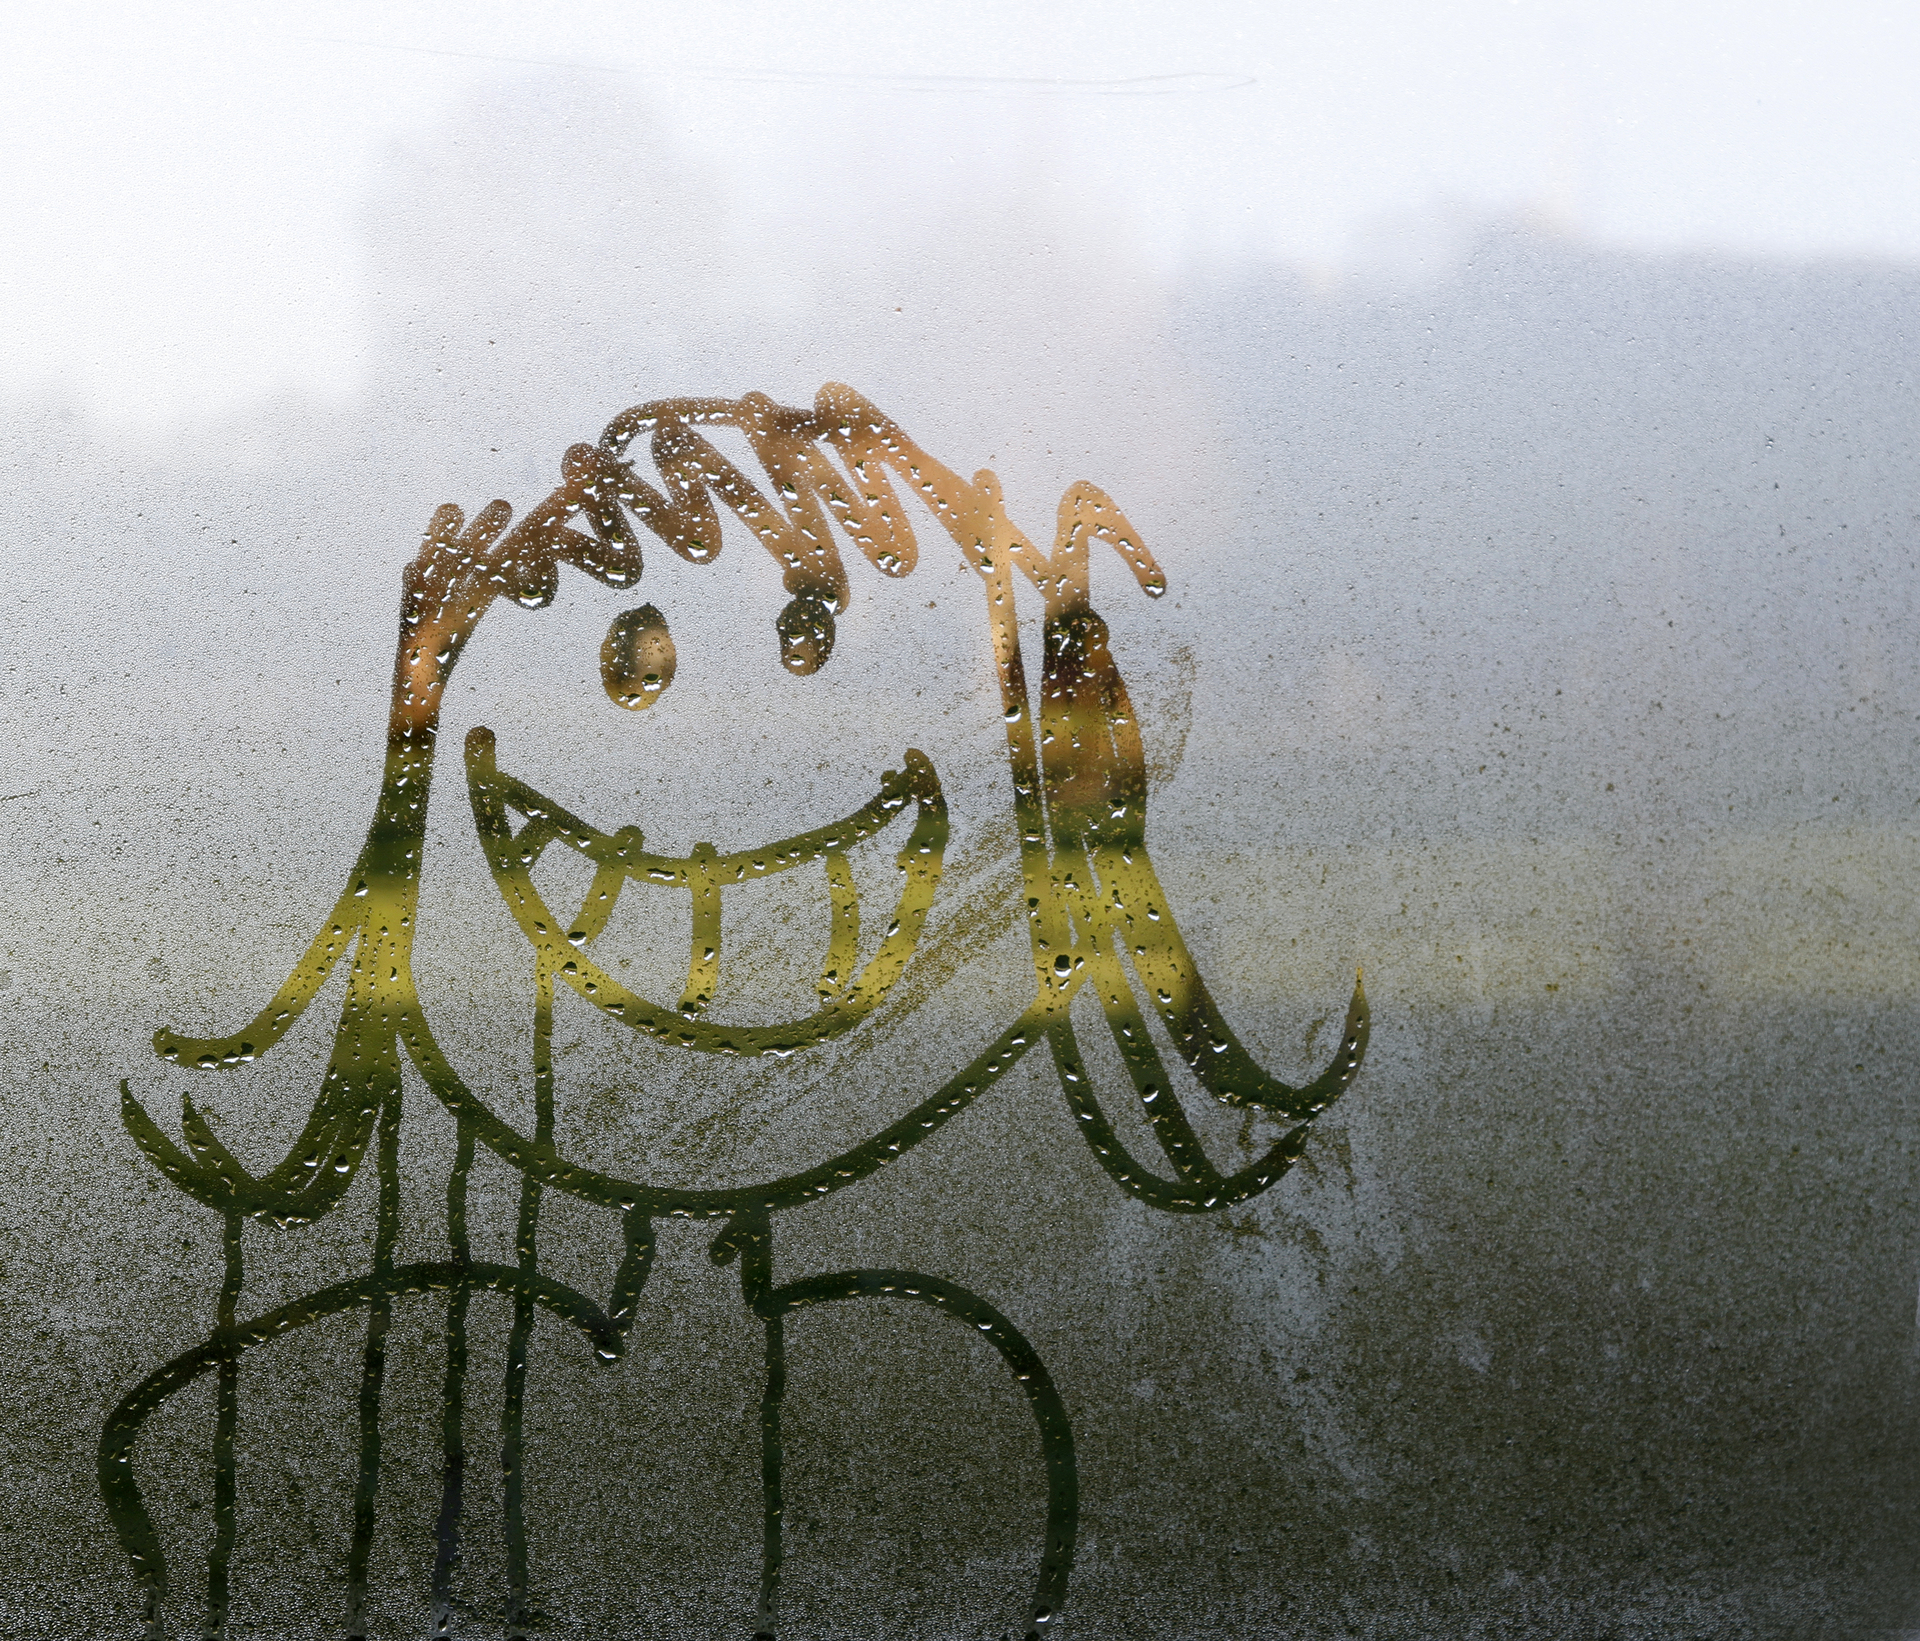 Smiley face drawn on condensation on window